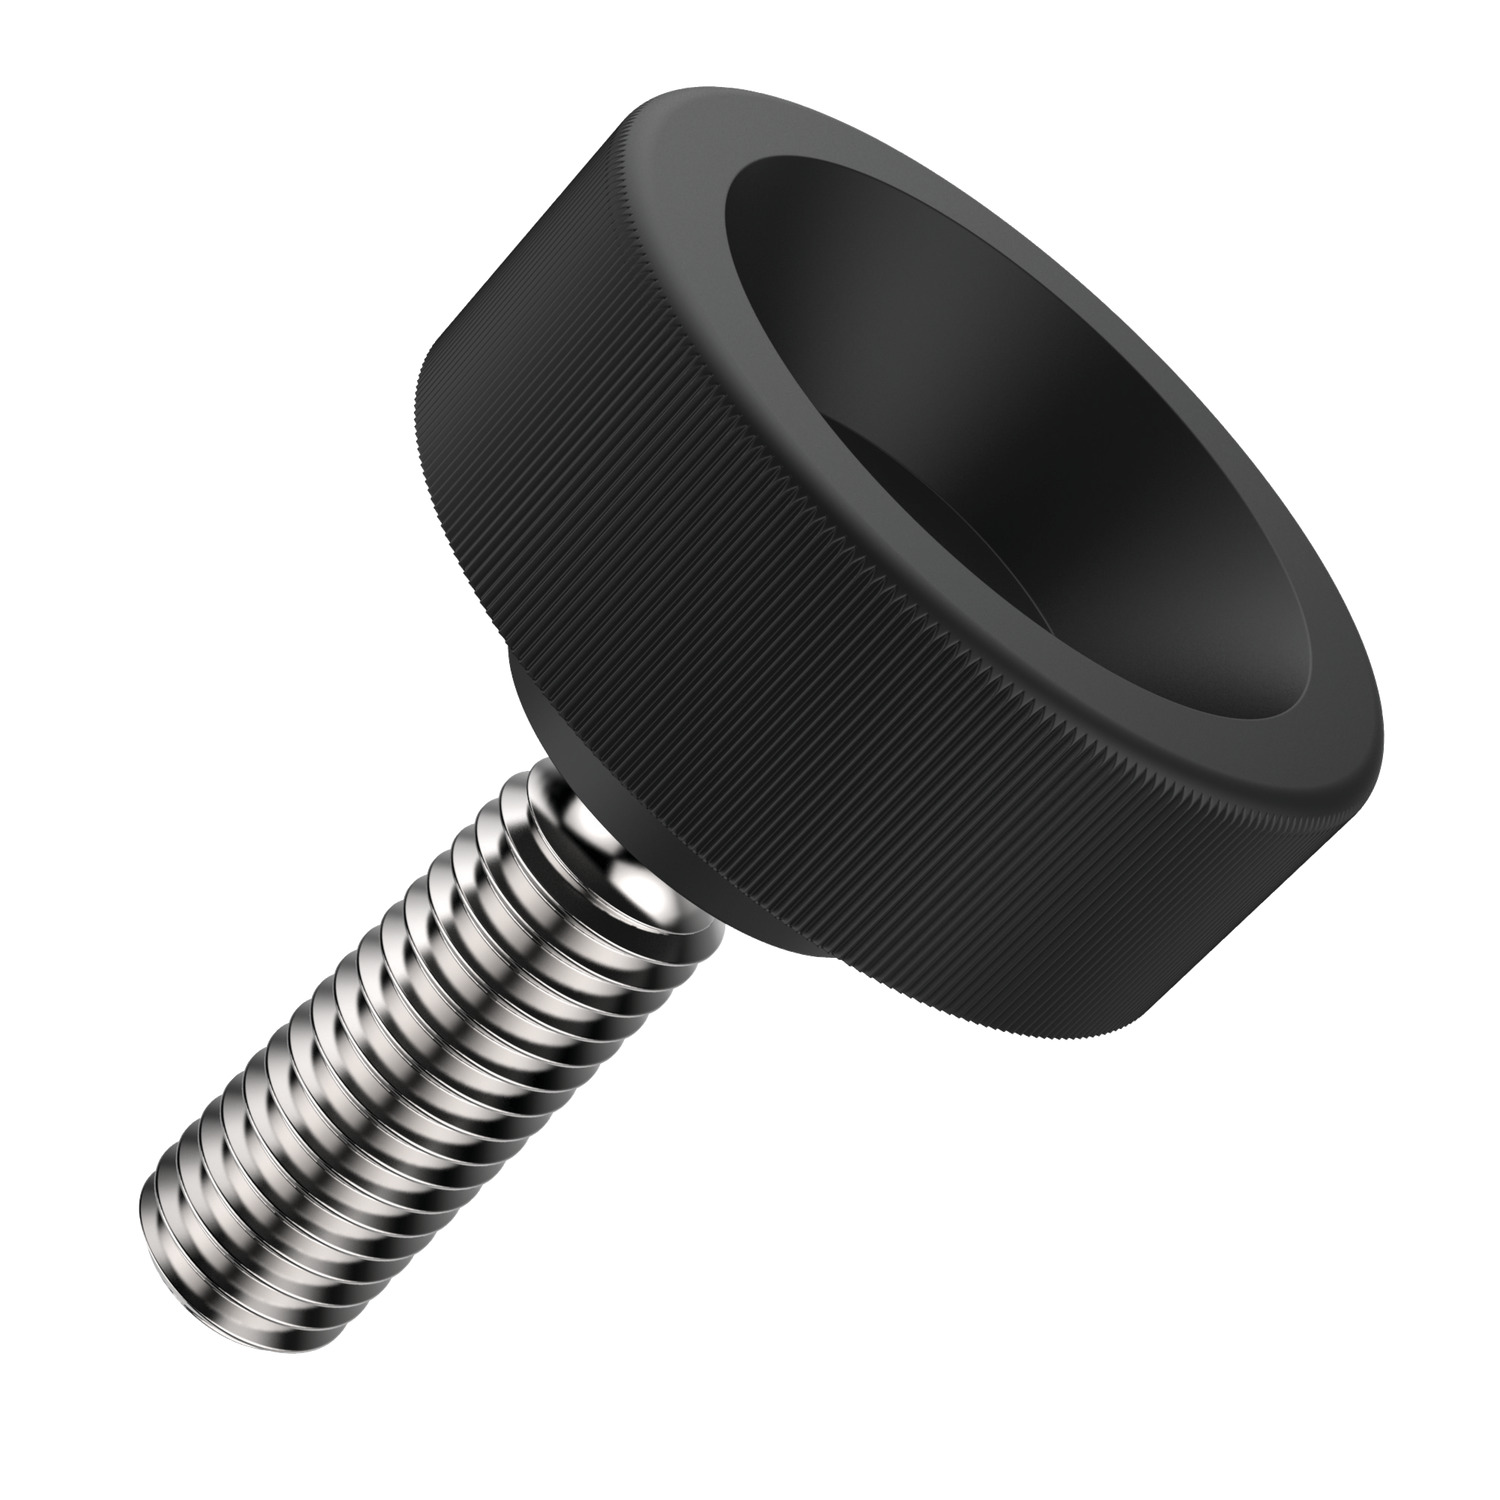 Knurled Thumb Screws This knurled thumb screw features a thermoplastic head and galvanised stud. Sizes range from M4 to M10.